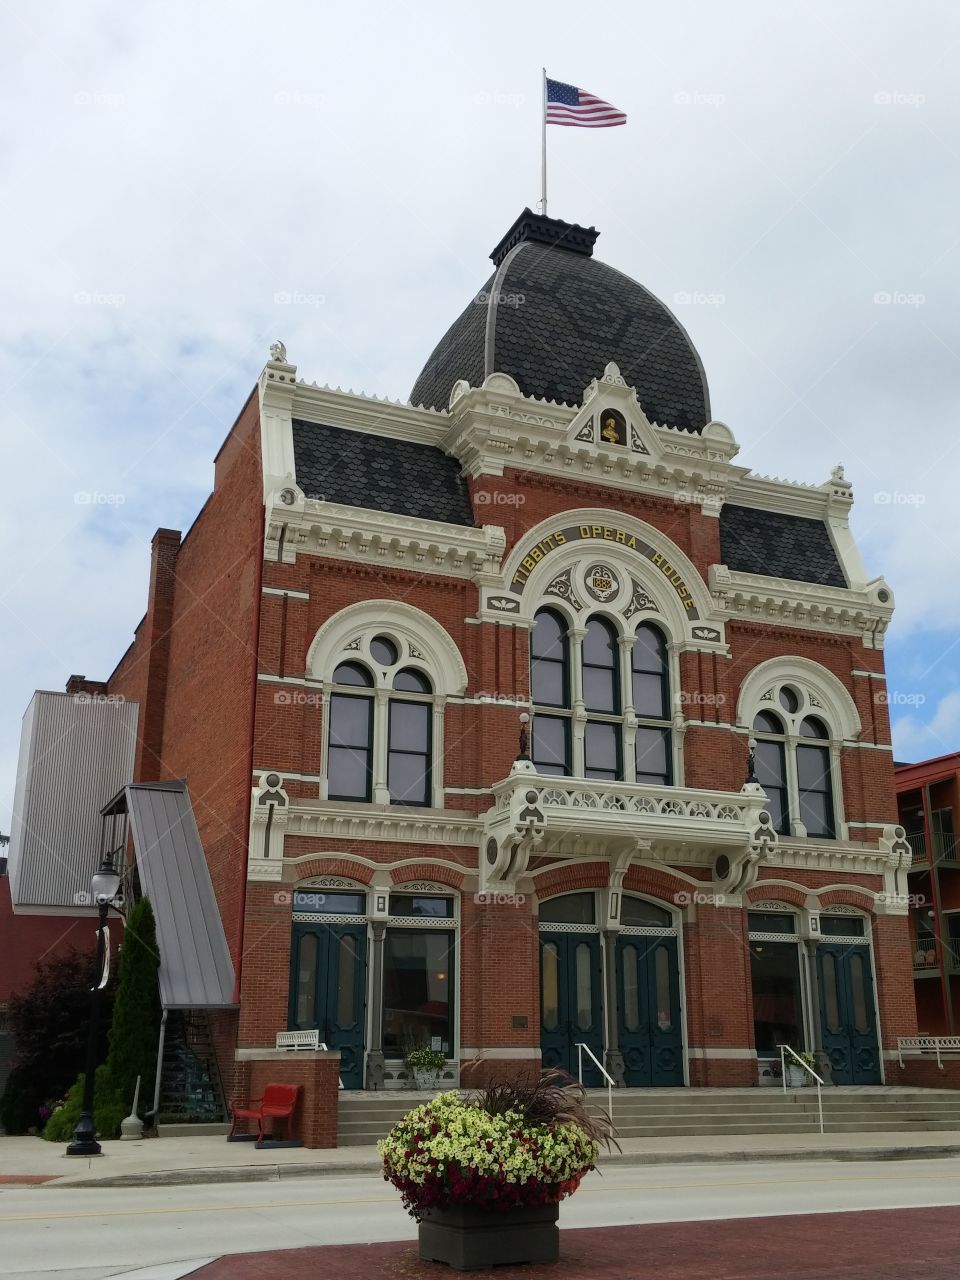 Tibbets Opera House in Coldwater Michigan